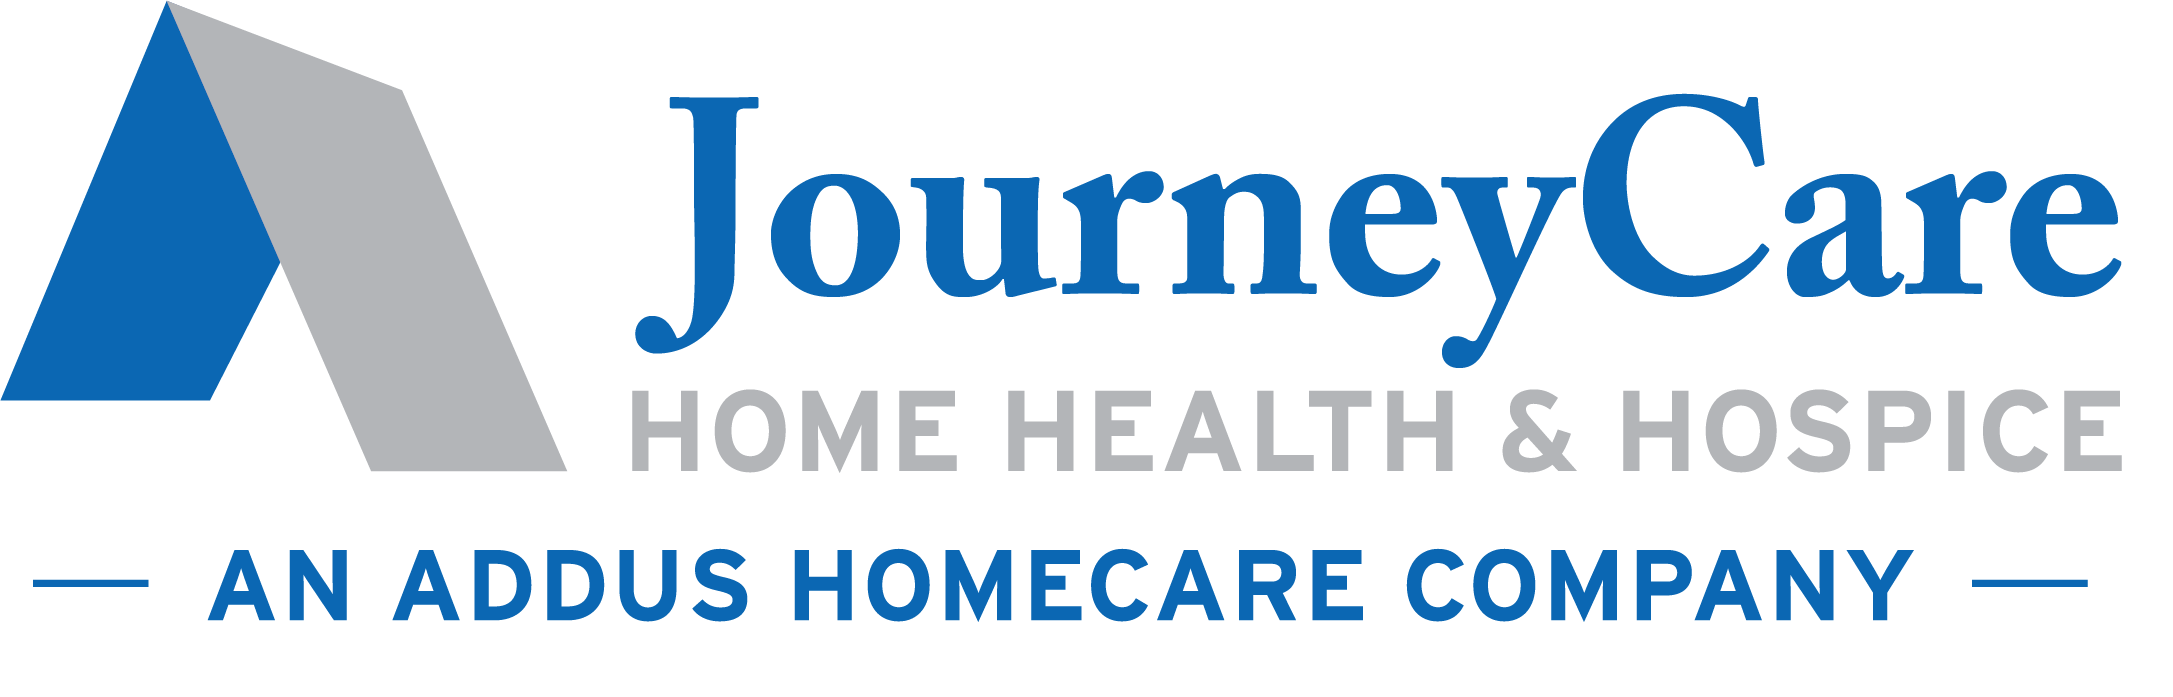 JourneyCare HH and Hospice MAIN Blue_Gray